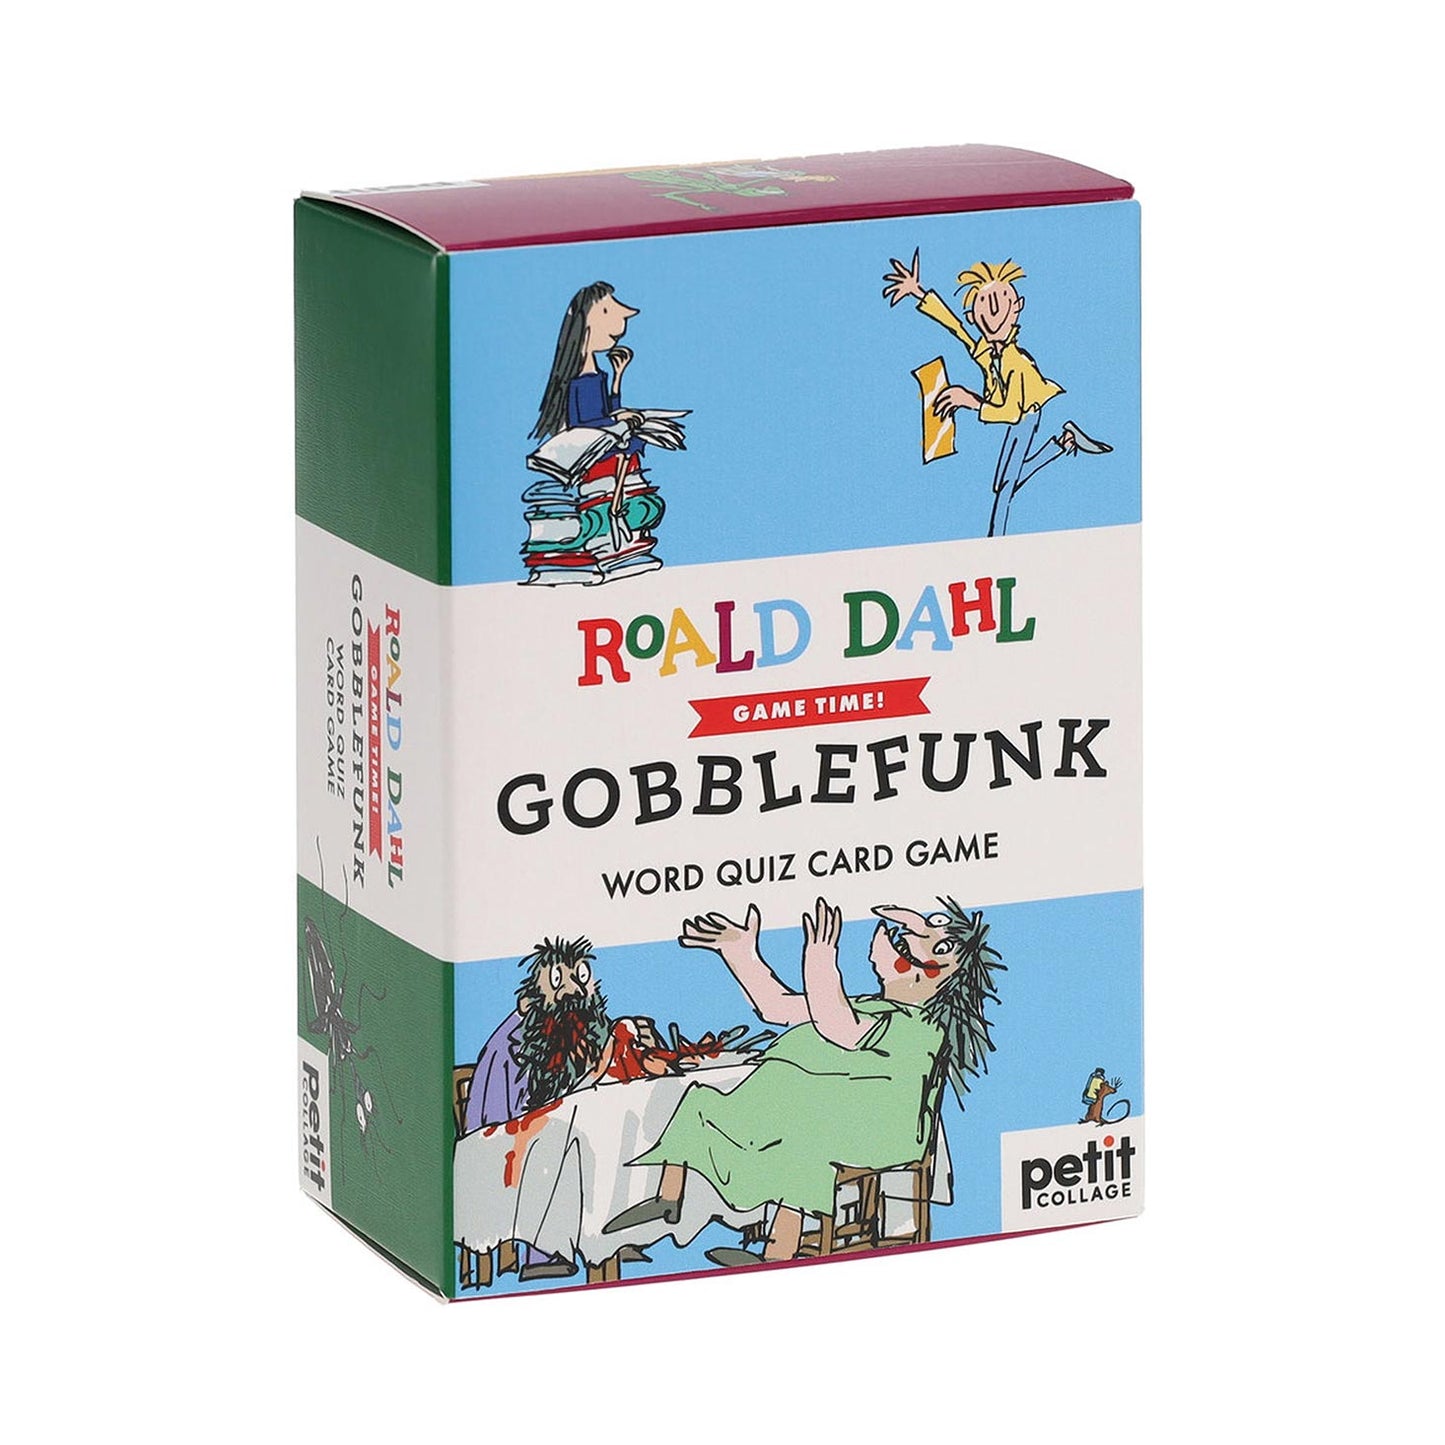 Gobblefunk Word Quiz Card Game from Roald Dahl and Quentin Blake